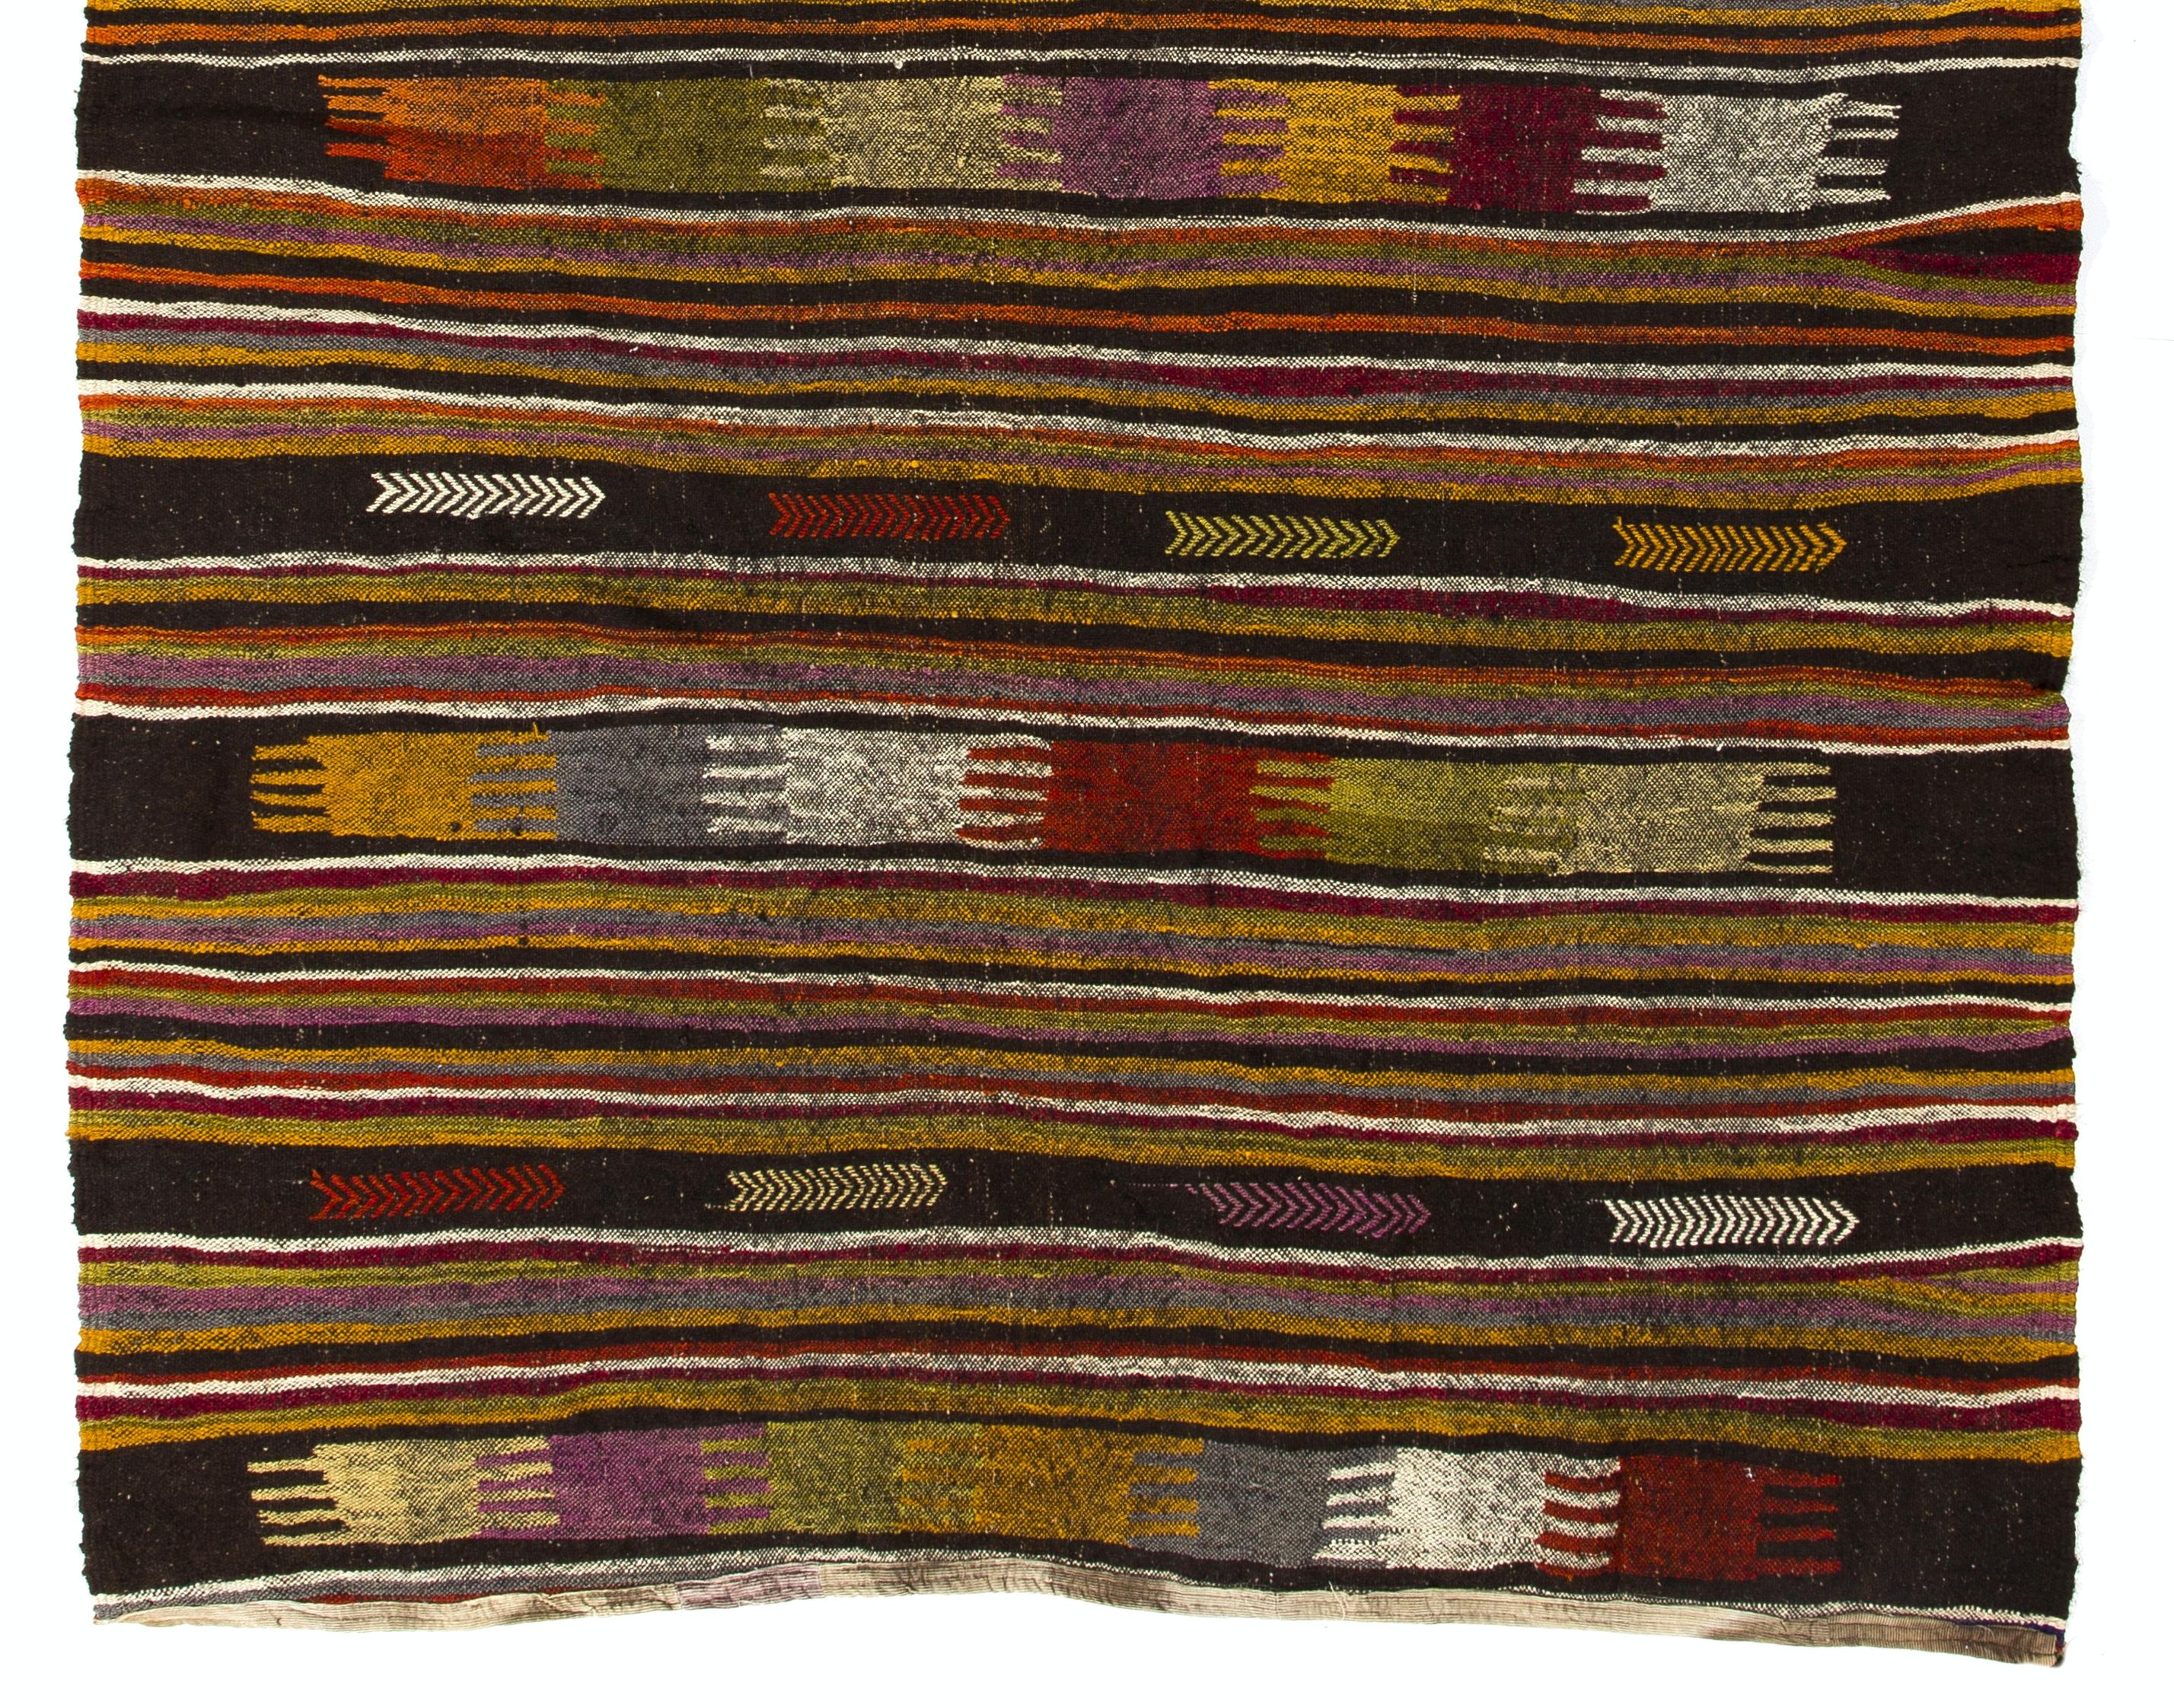 5.8x9 Ft Vintage Hand-Woven Central Anatolian Kilim Rug with Striped Design In Good Condition For Sale In Philadelphia, PA